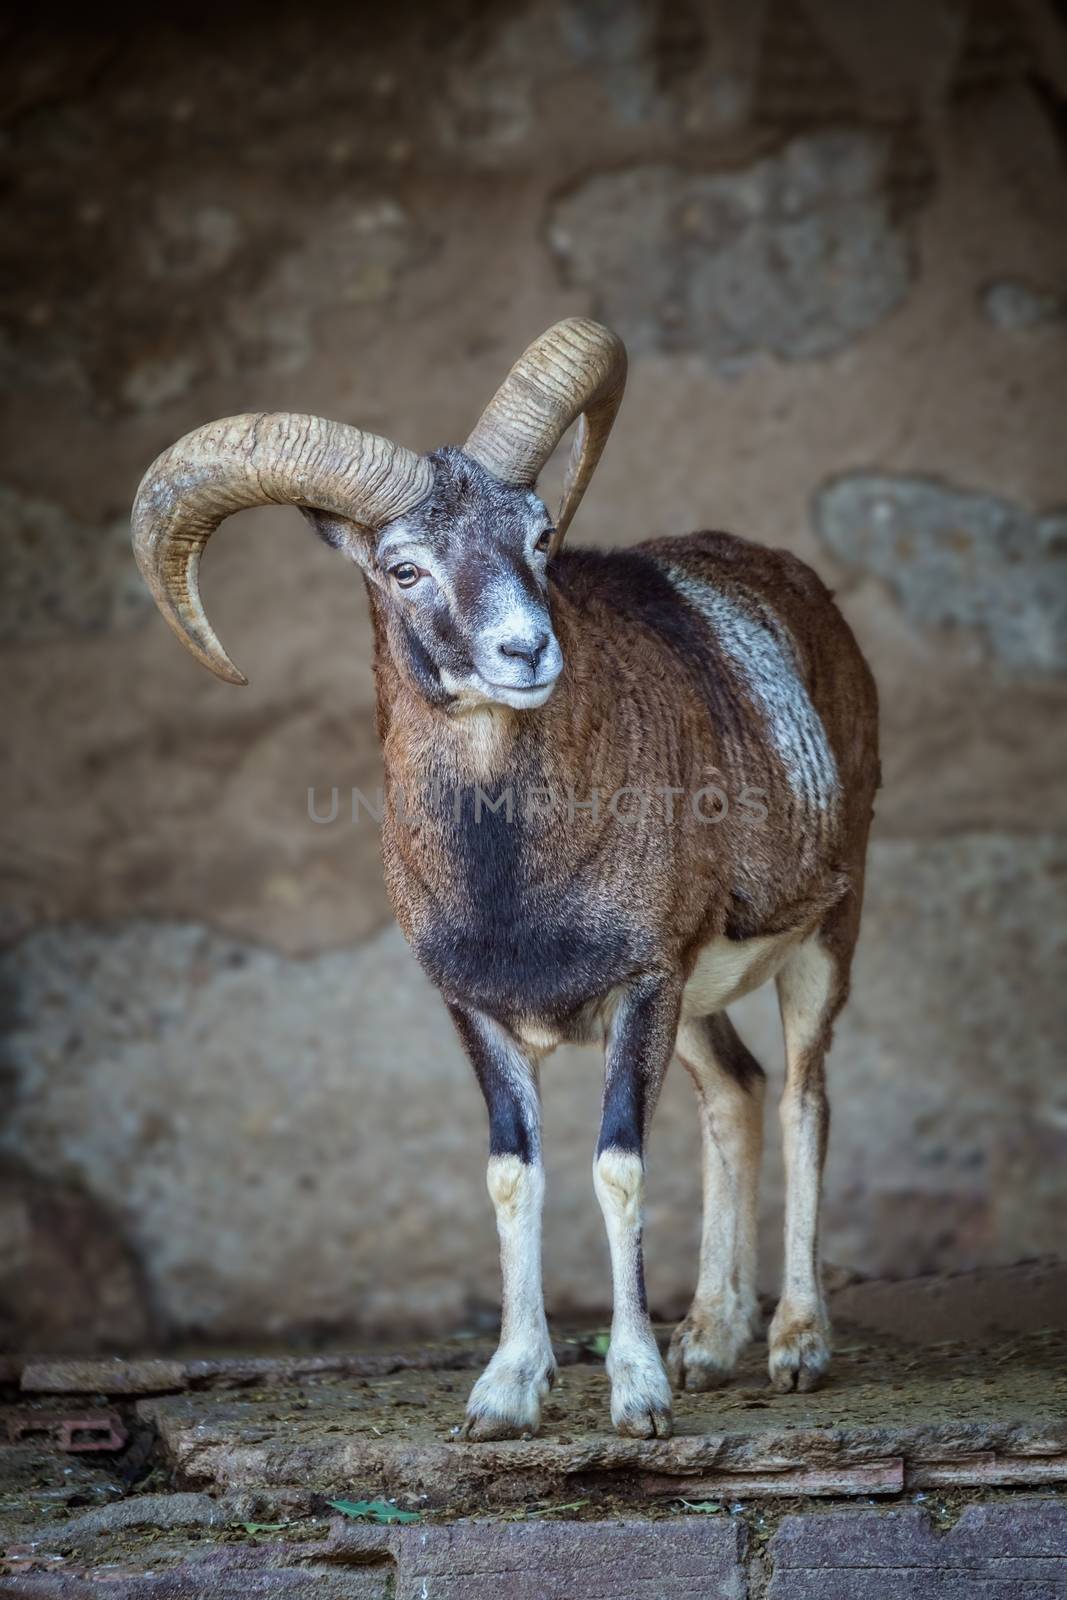 Adult mouflon aries in the zoo of Barcelona in Spain by Digoarpi